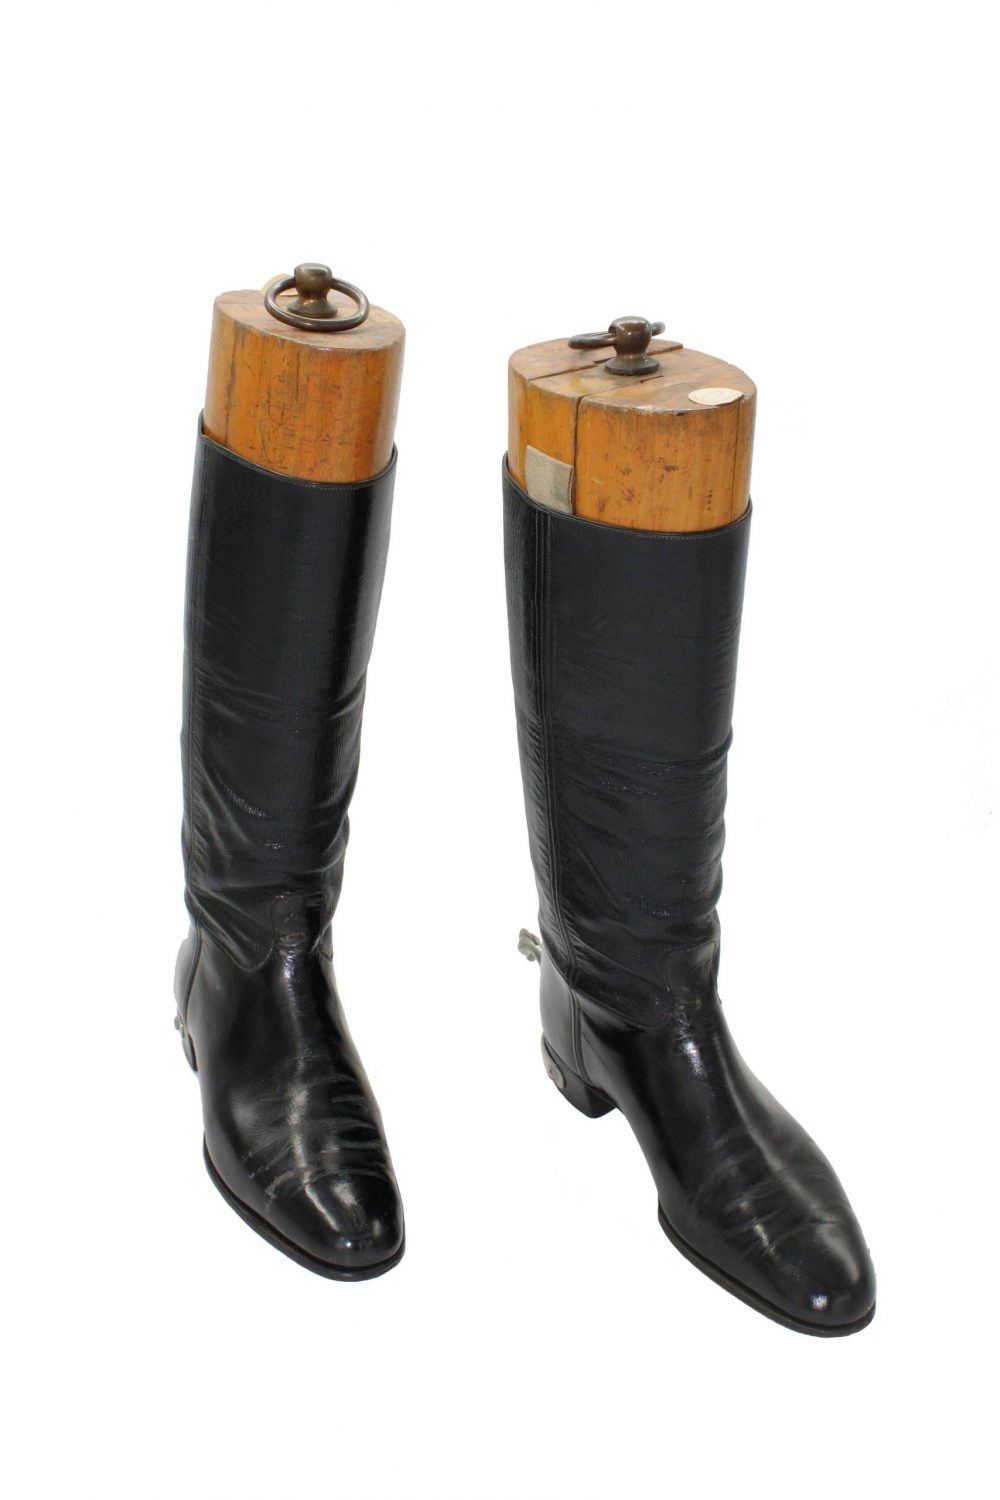 Black leather boots with a small block heel, which finish at mid calf